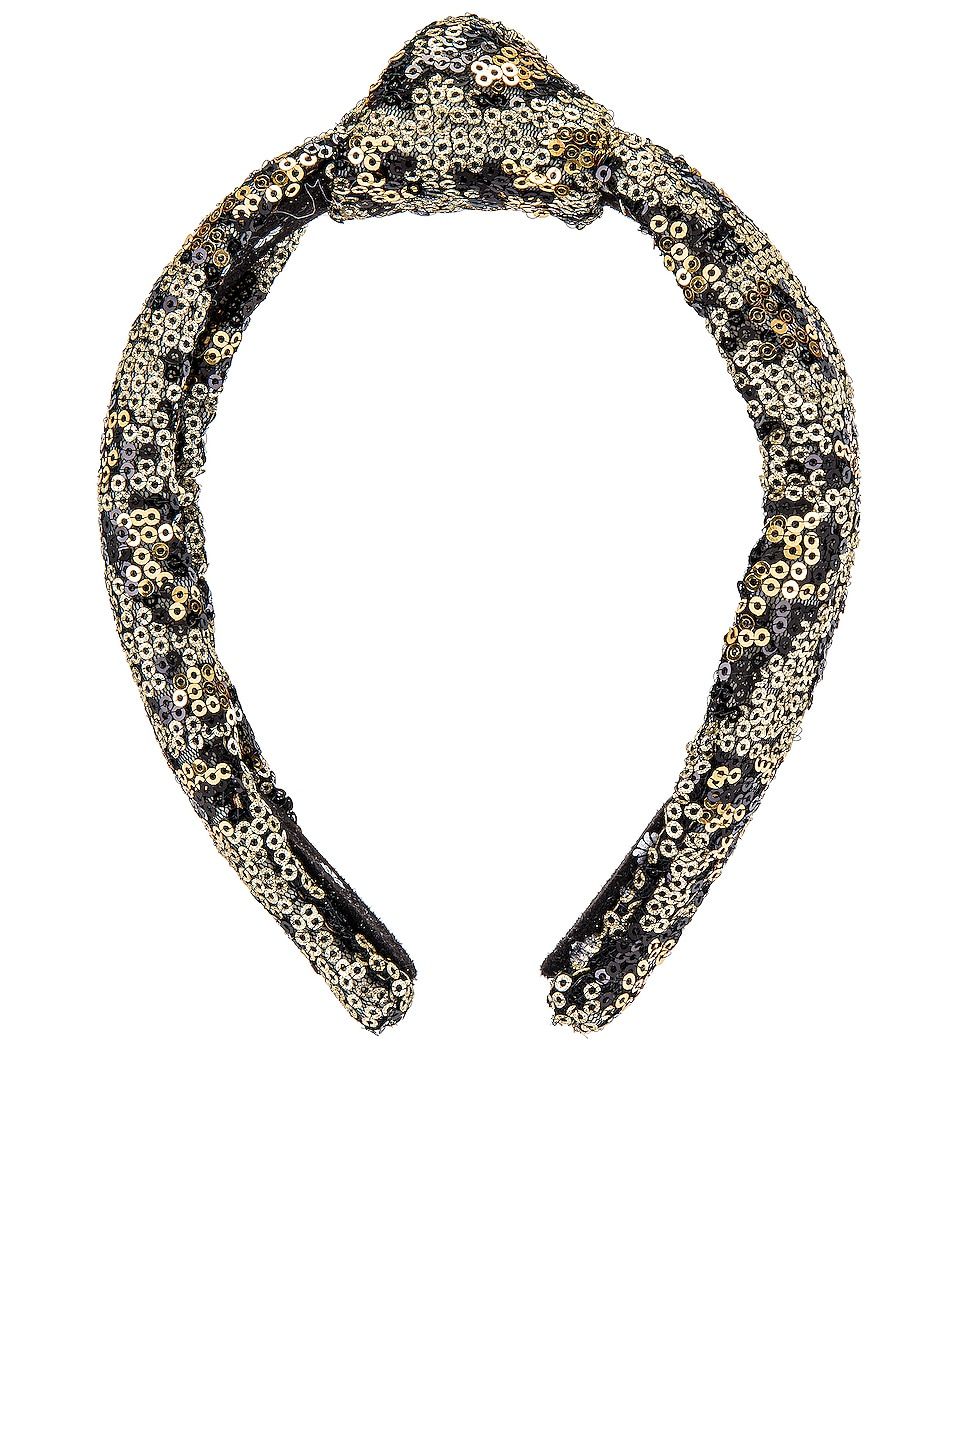 Sequin Knotted Headband